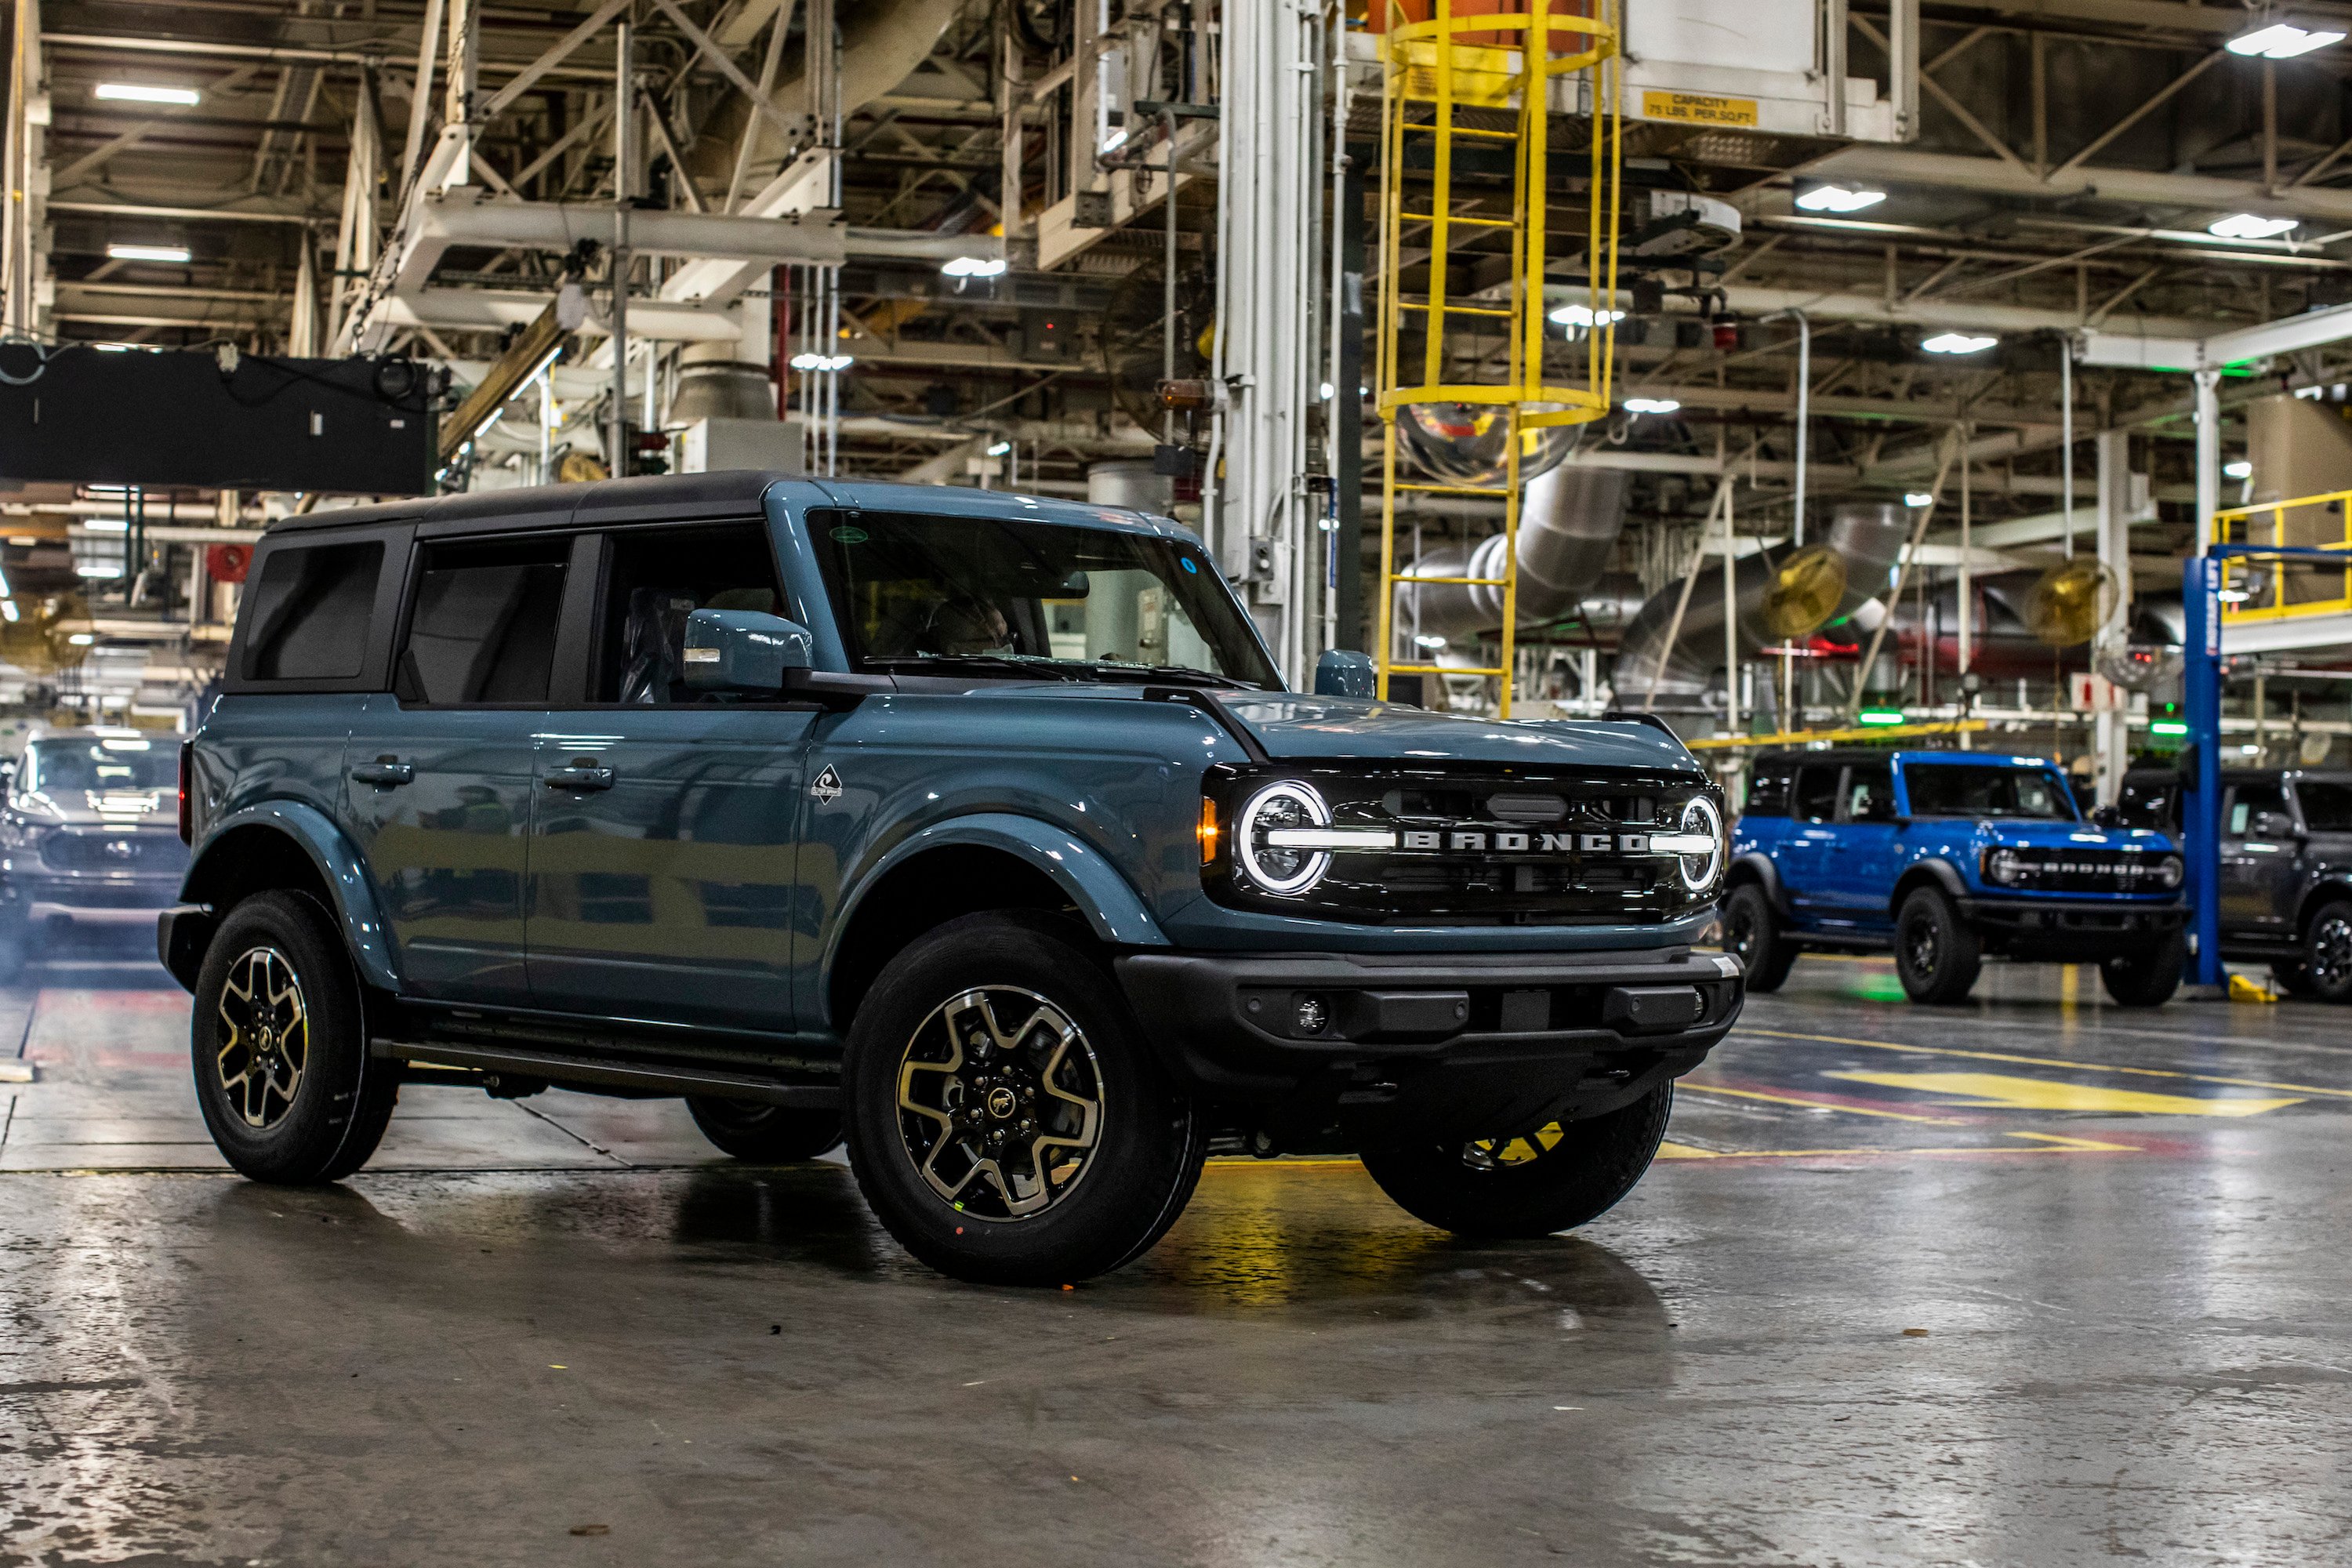 2021-ford-Bronco-production-4-door-credit-ford